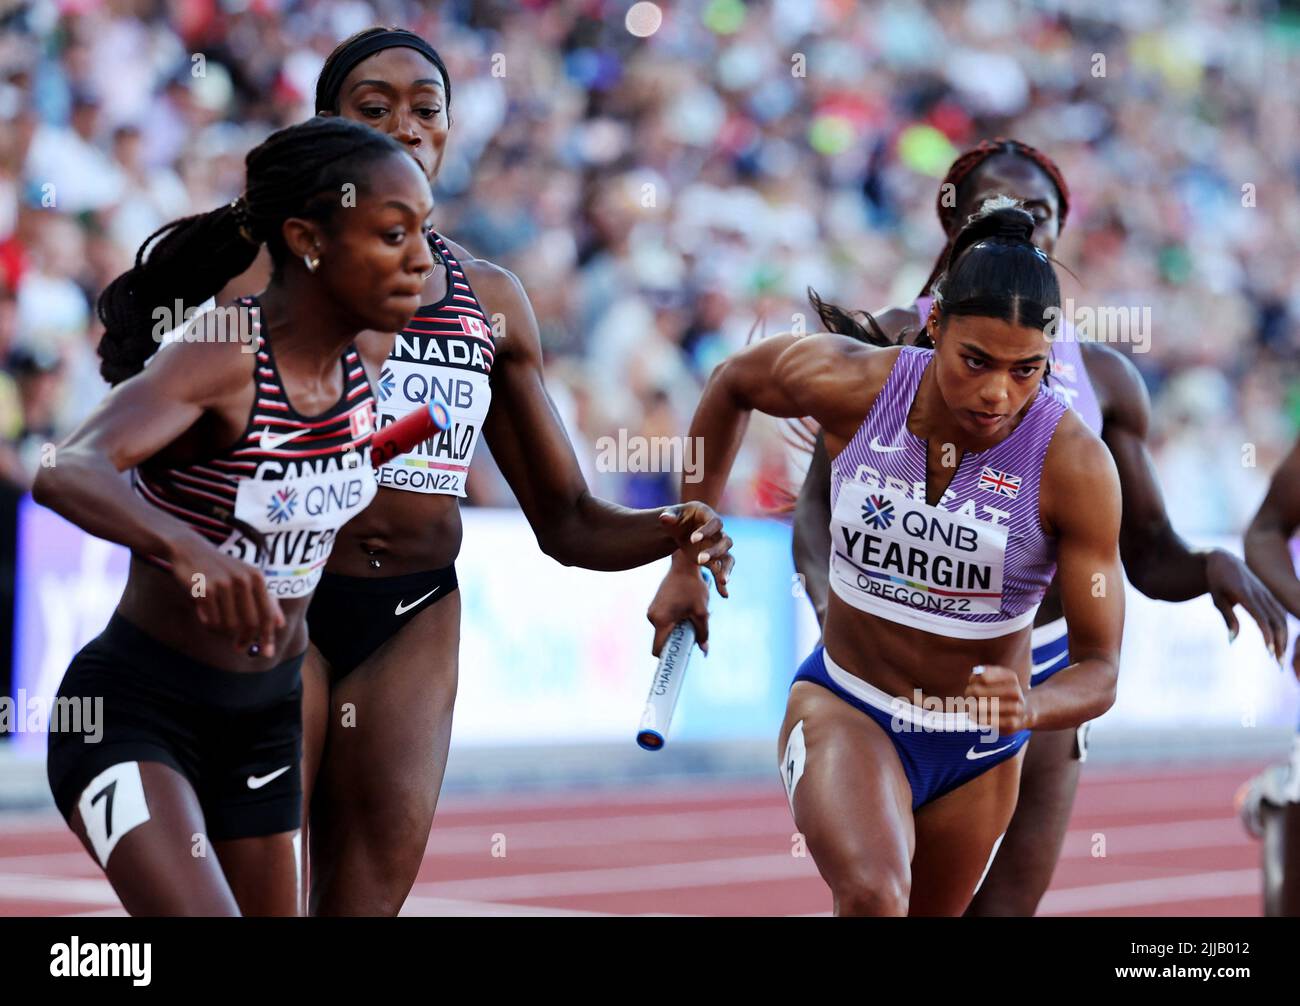 Athletics - World Athletics Championships - Women's 4x400 Metres Relay - Final - Hayward Field, Eugene, Oregon, U.S. - July 24, 2022 Britain's Nicole Yeargin in action during the women's 4x400 metres final REUTERS/Lucy Nicholson Stock Photo